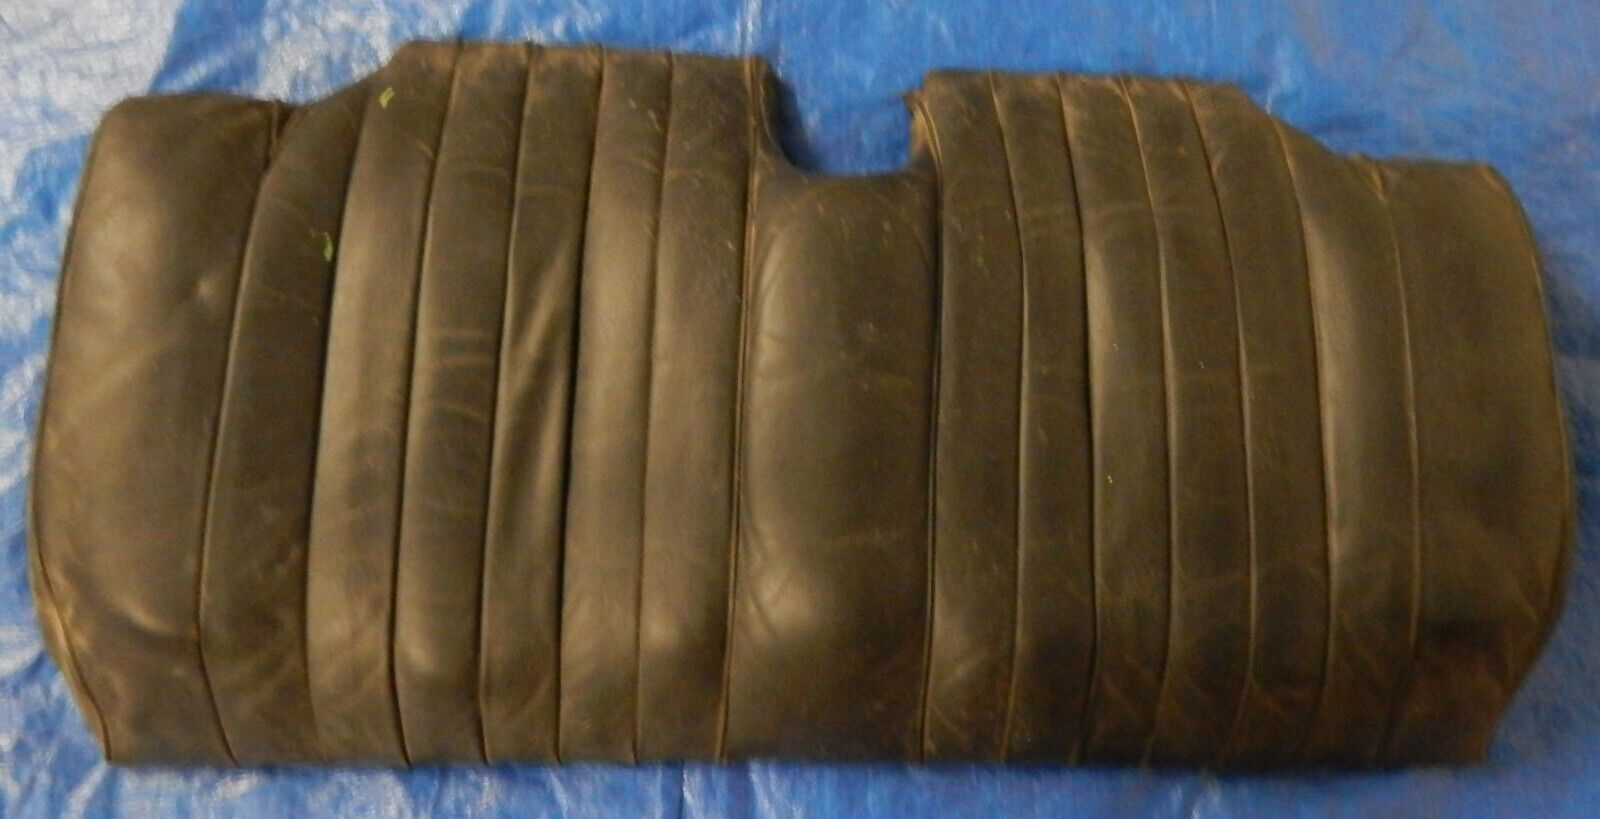 Used Original Morgan 4/4 Black Leather Seat Back and Cushion Covers